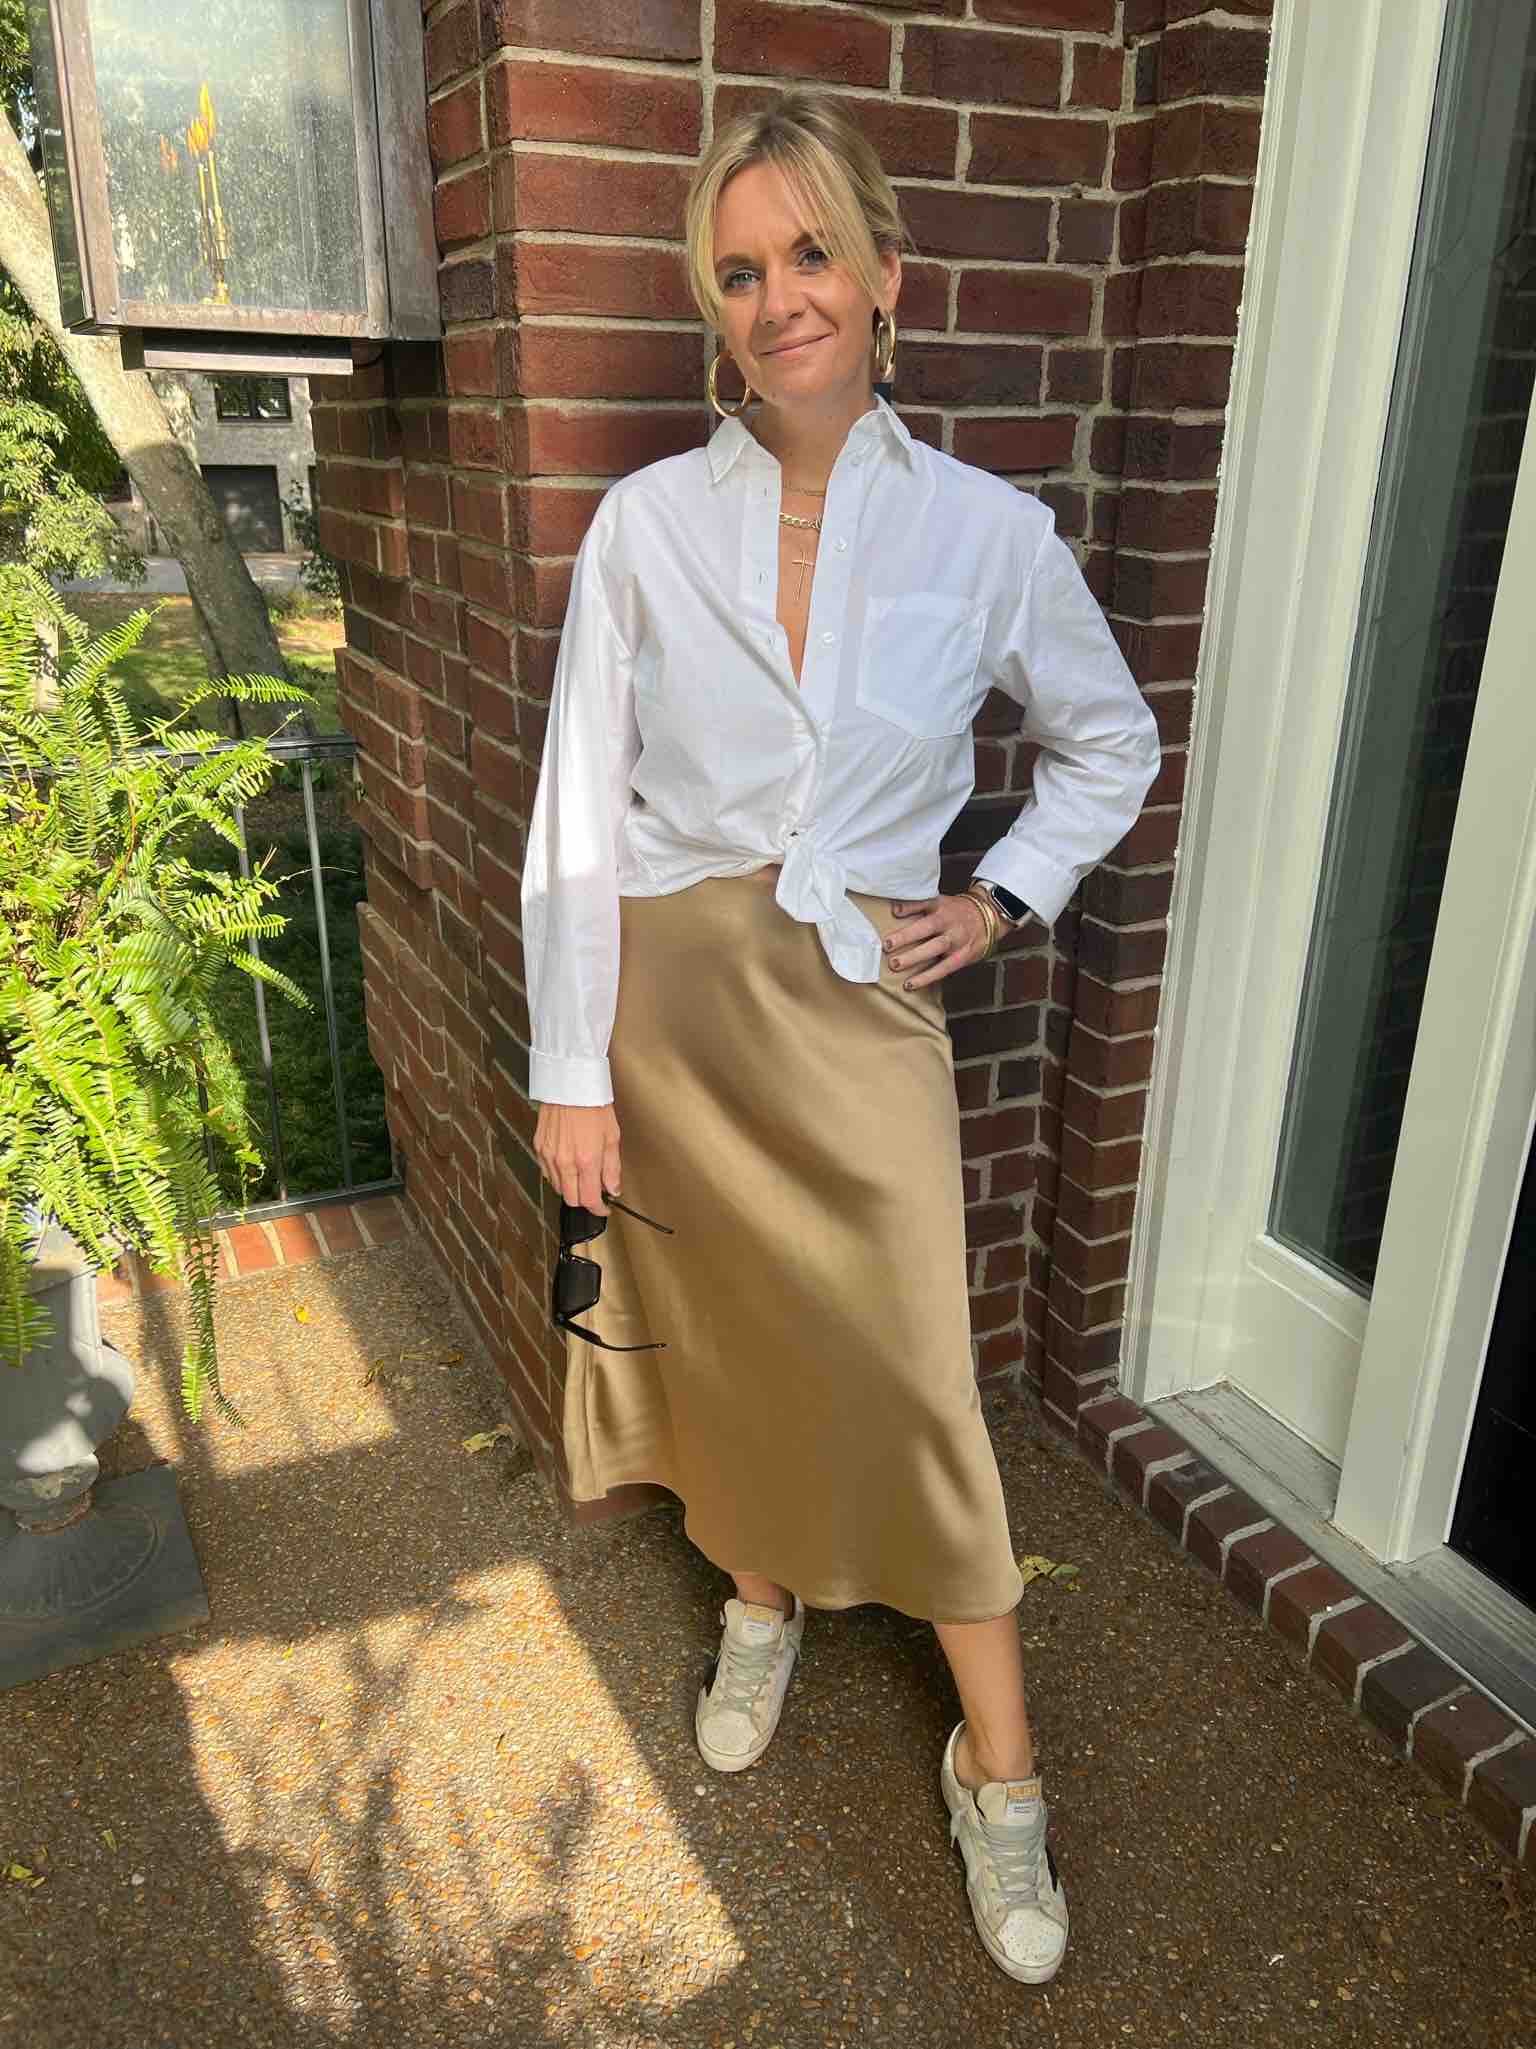 November Favorites From Our Nashville Personal Stylists Button-Up Shirt & Slip Skirt how to style a slip skirt how to wear a butotn-up shirt with a slip skirt how to wear sneakers with a slip skirt